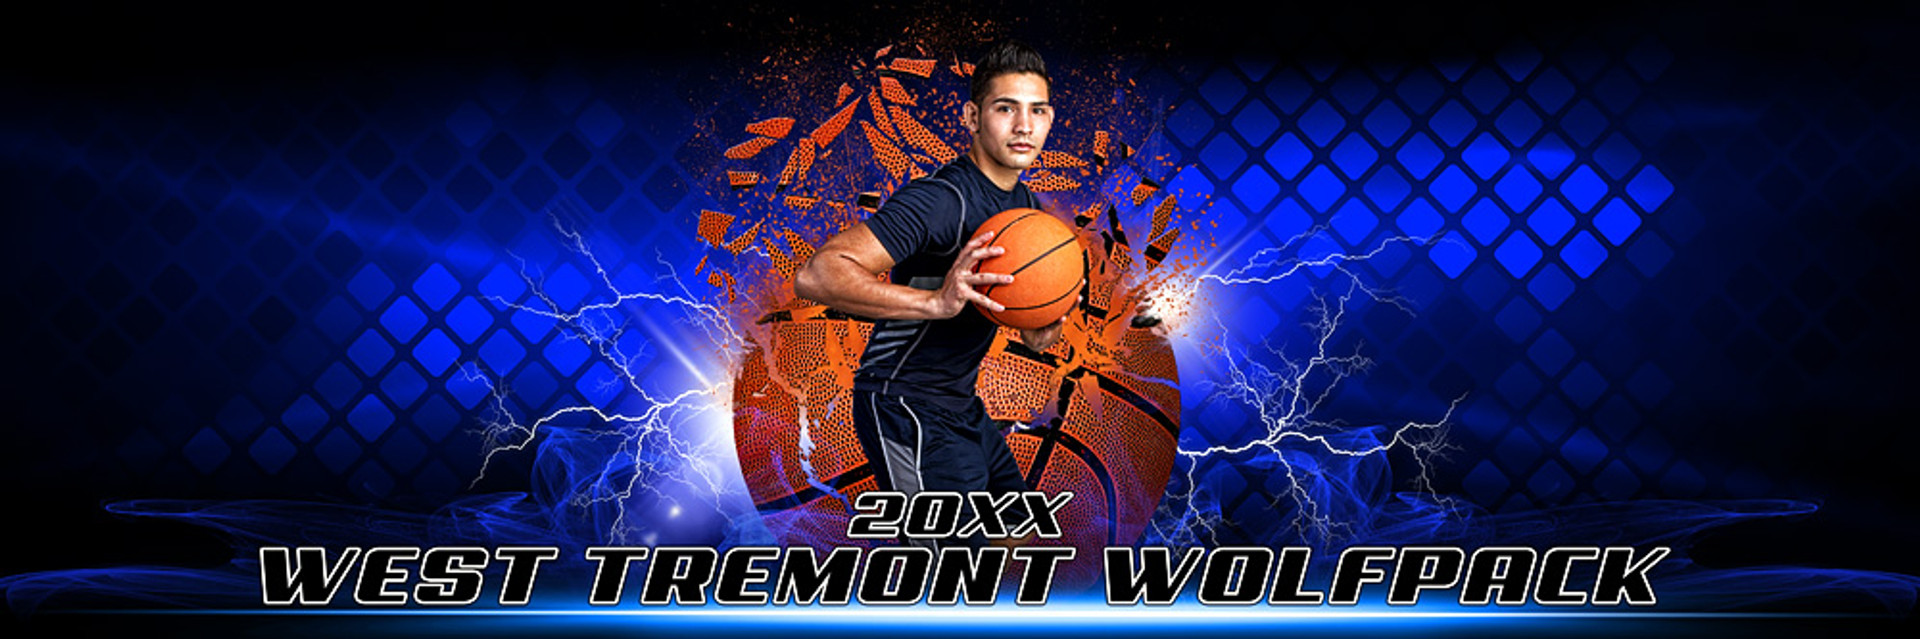 Panoramic Sports Team Banner Photo Template Shattered Basketball